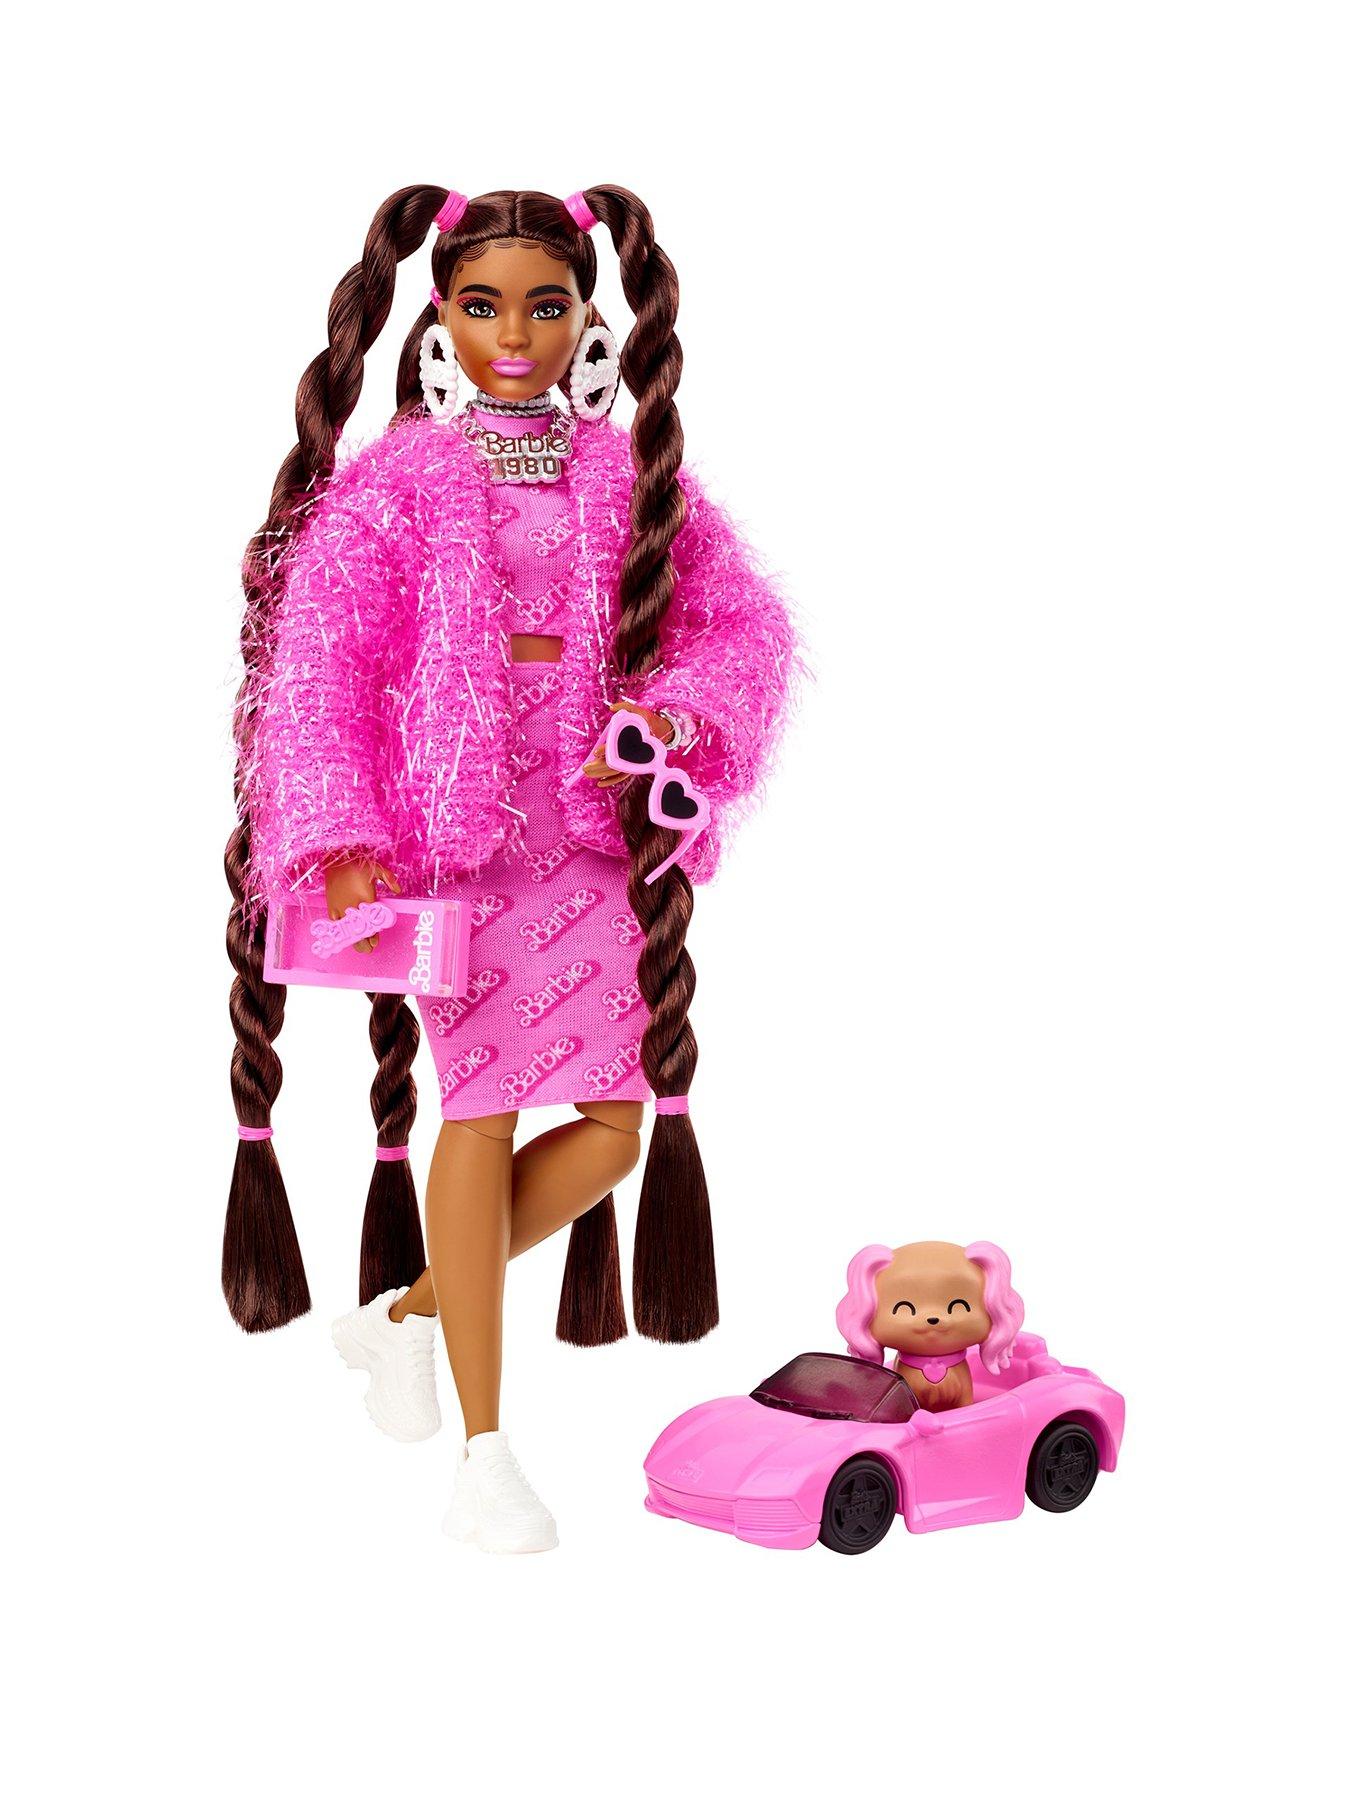 Details about   Its a girl barbie doll with bear 